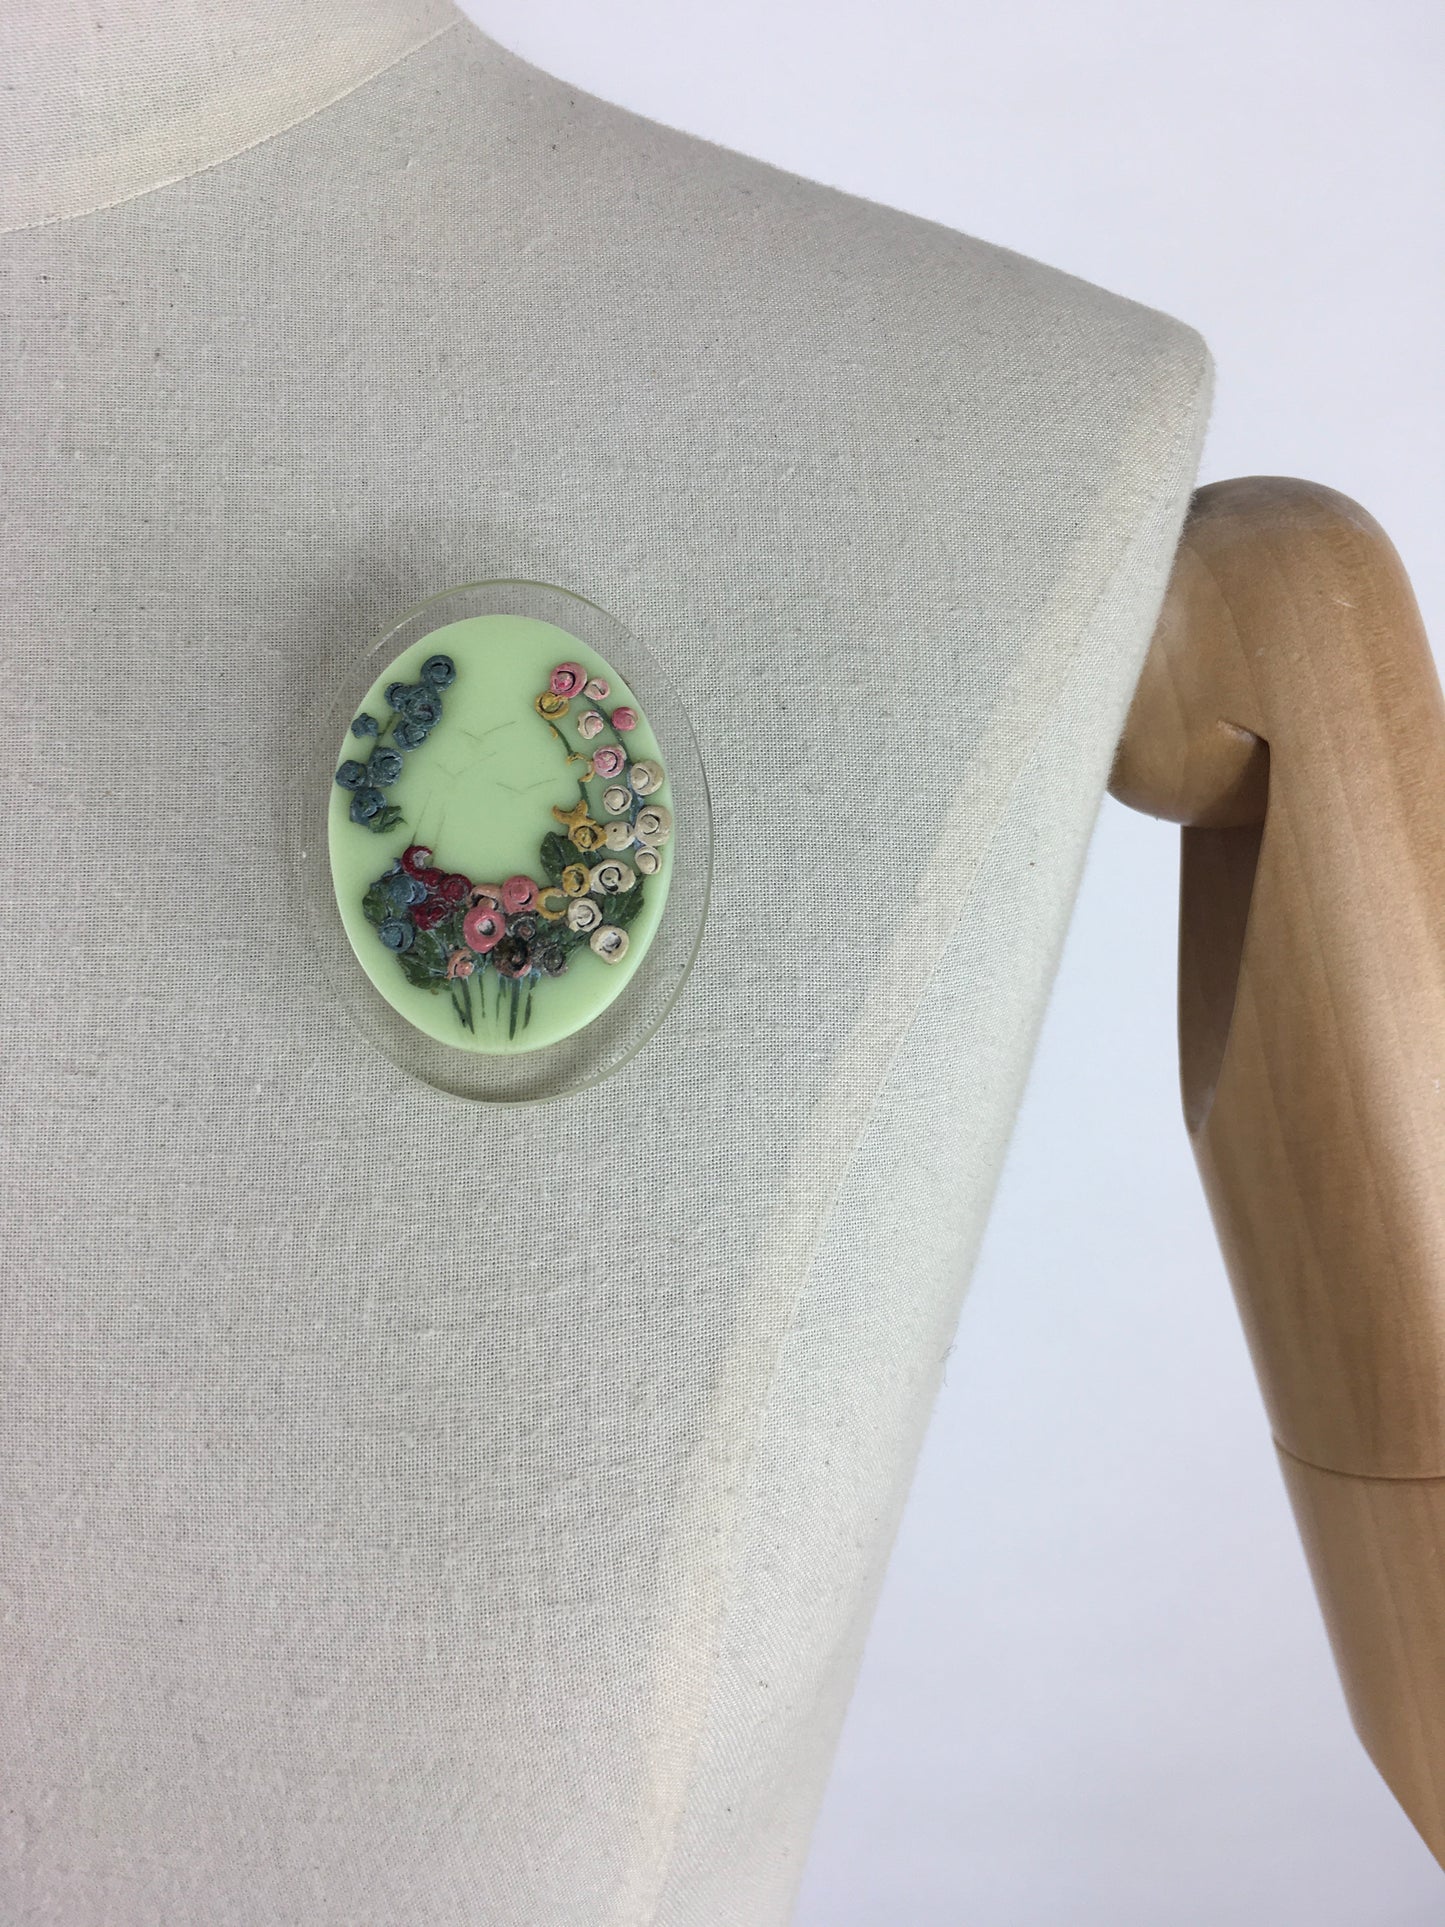 Original 1940’s Double Layered Lucite Brooch - With Handpainted Pastel Floral Details